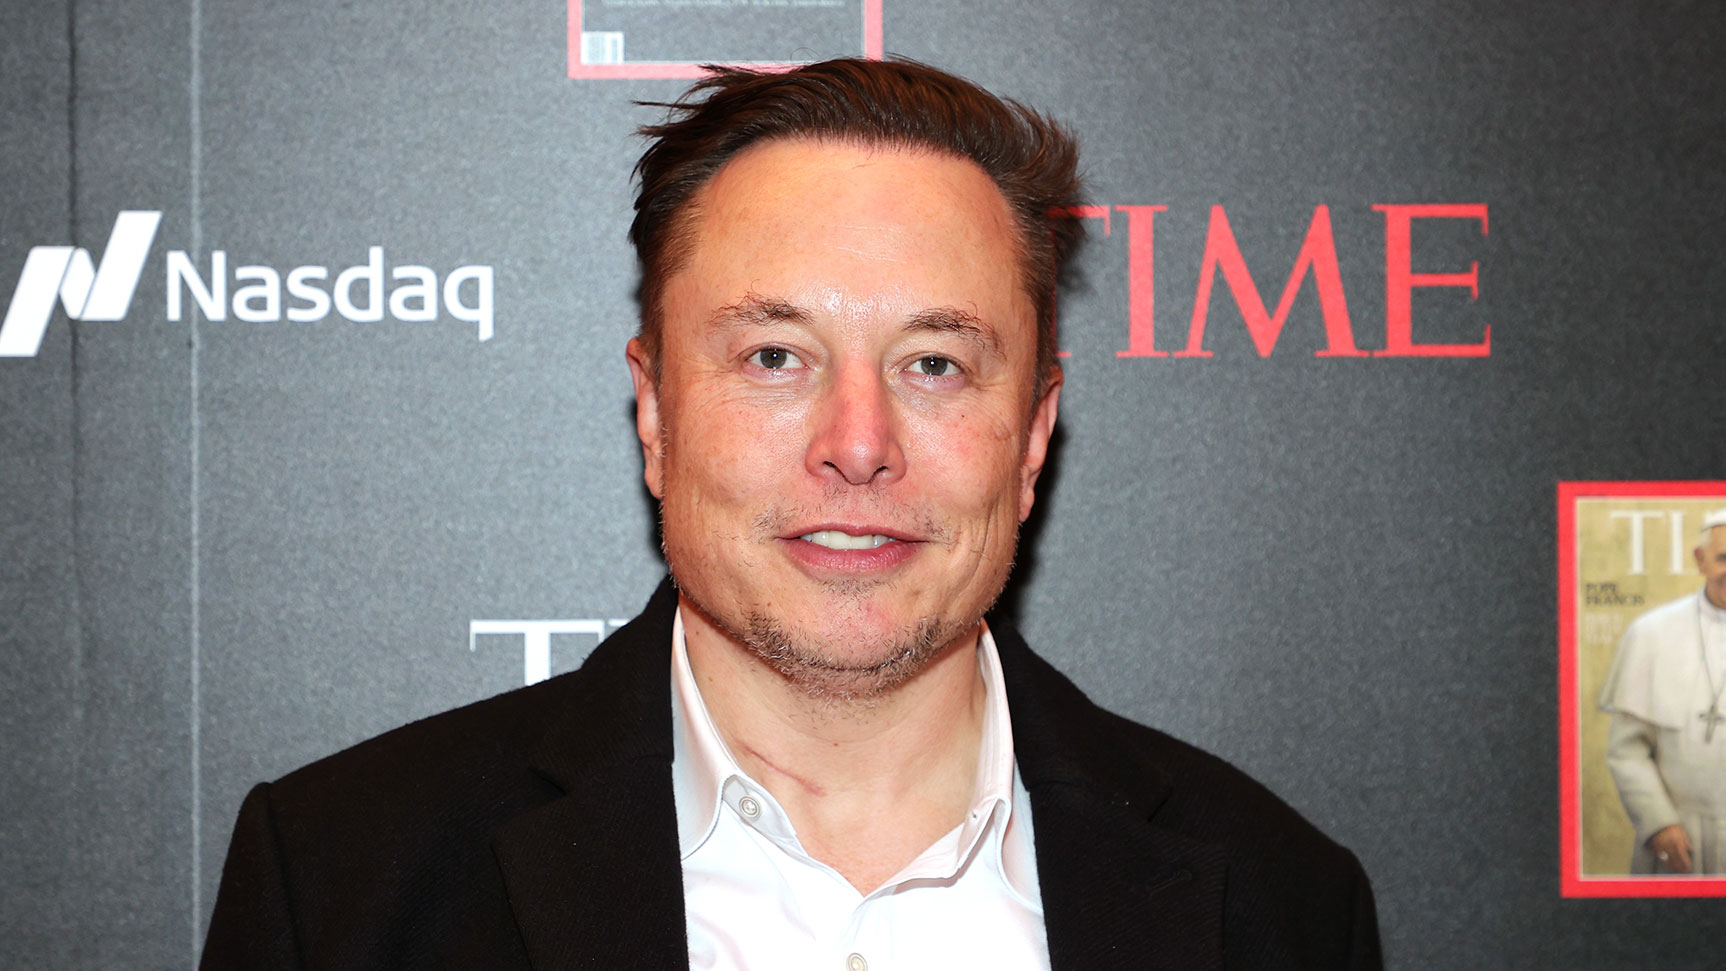 NEW YORK, NEW YORK - DECEMBER 13: Elon Musk attends TIME Person of the Year on December 13, 2021 in New York City. (Photo by Theo Wargo/Getty Images for TIME)